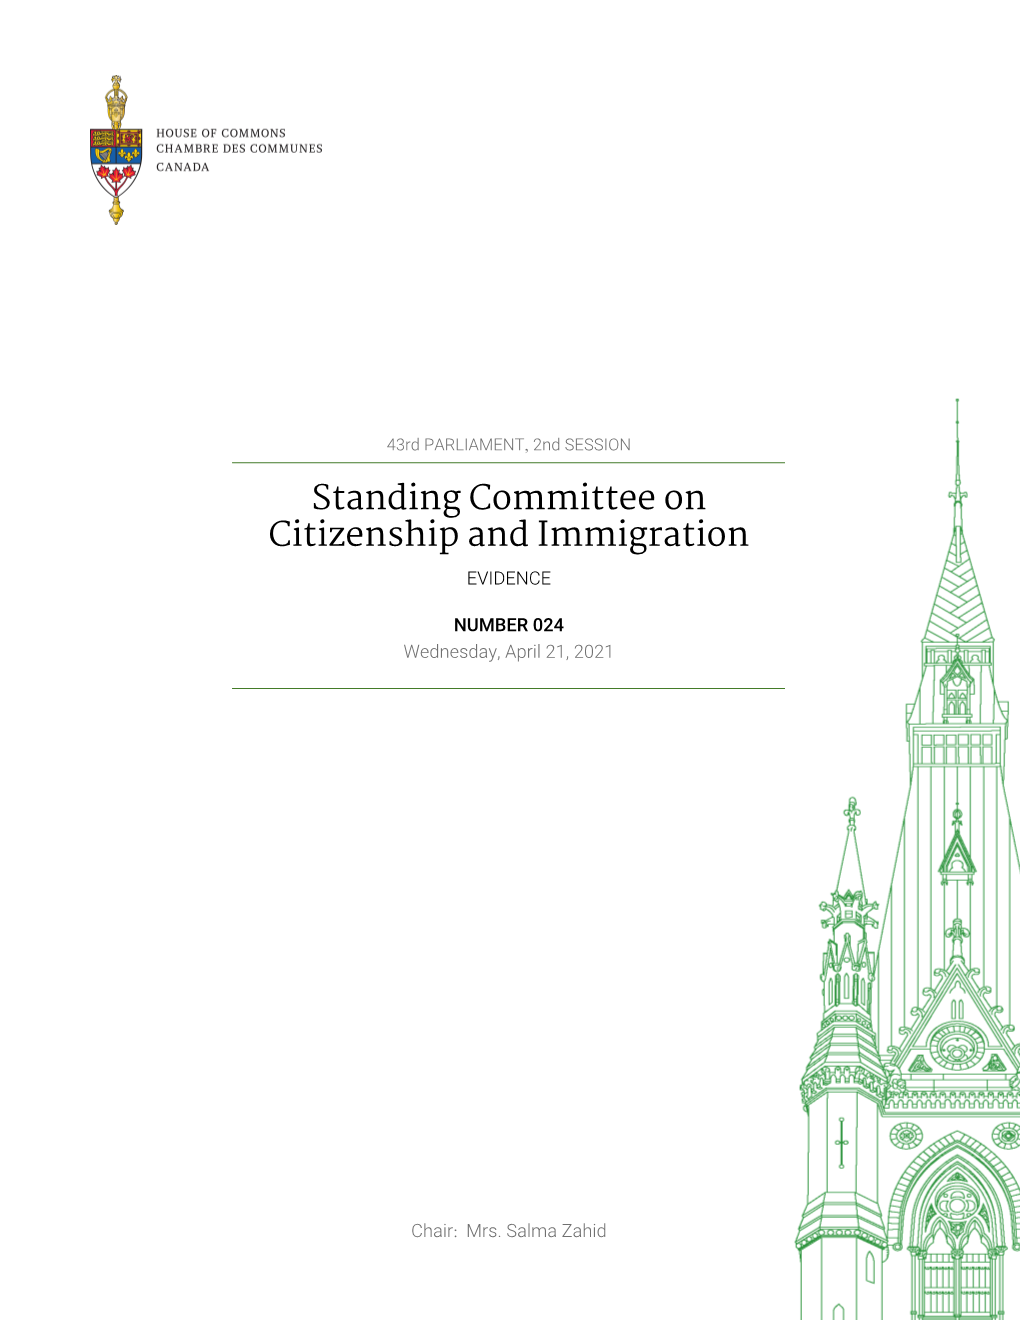 Evidence of the Standing Committee On